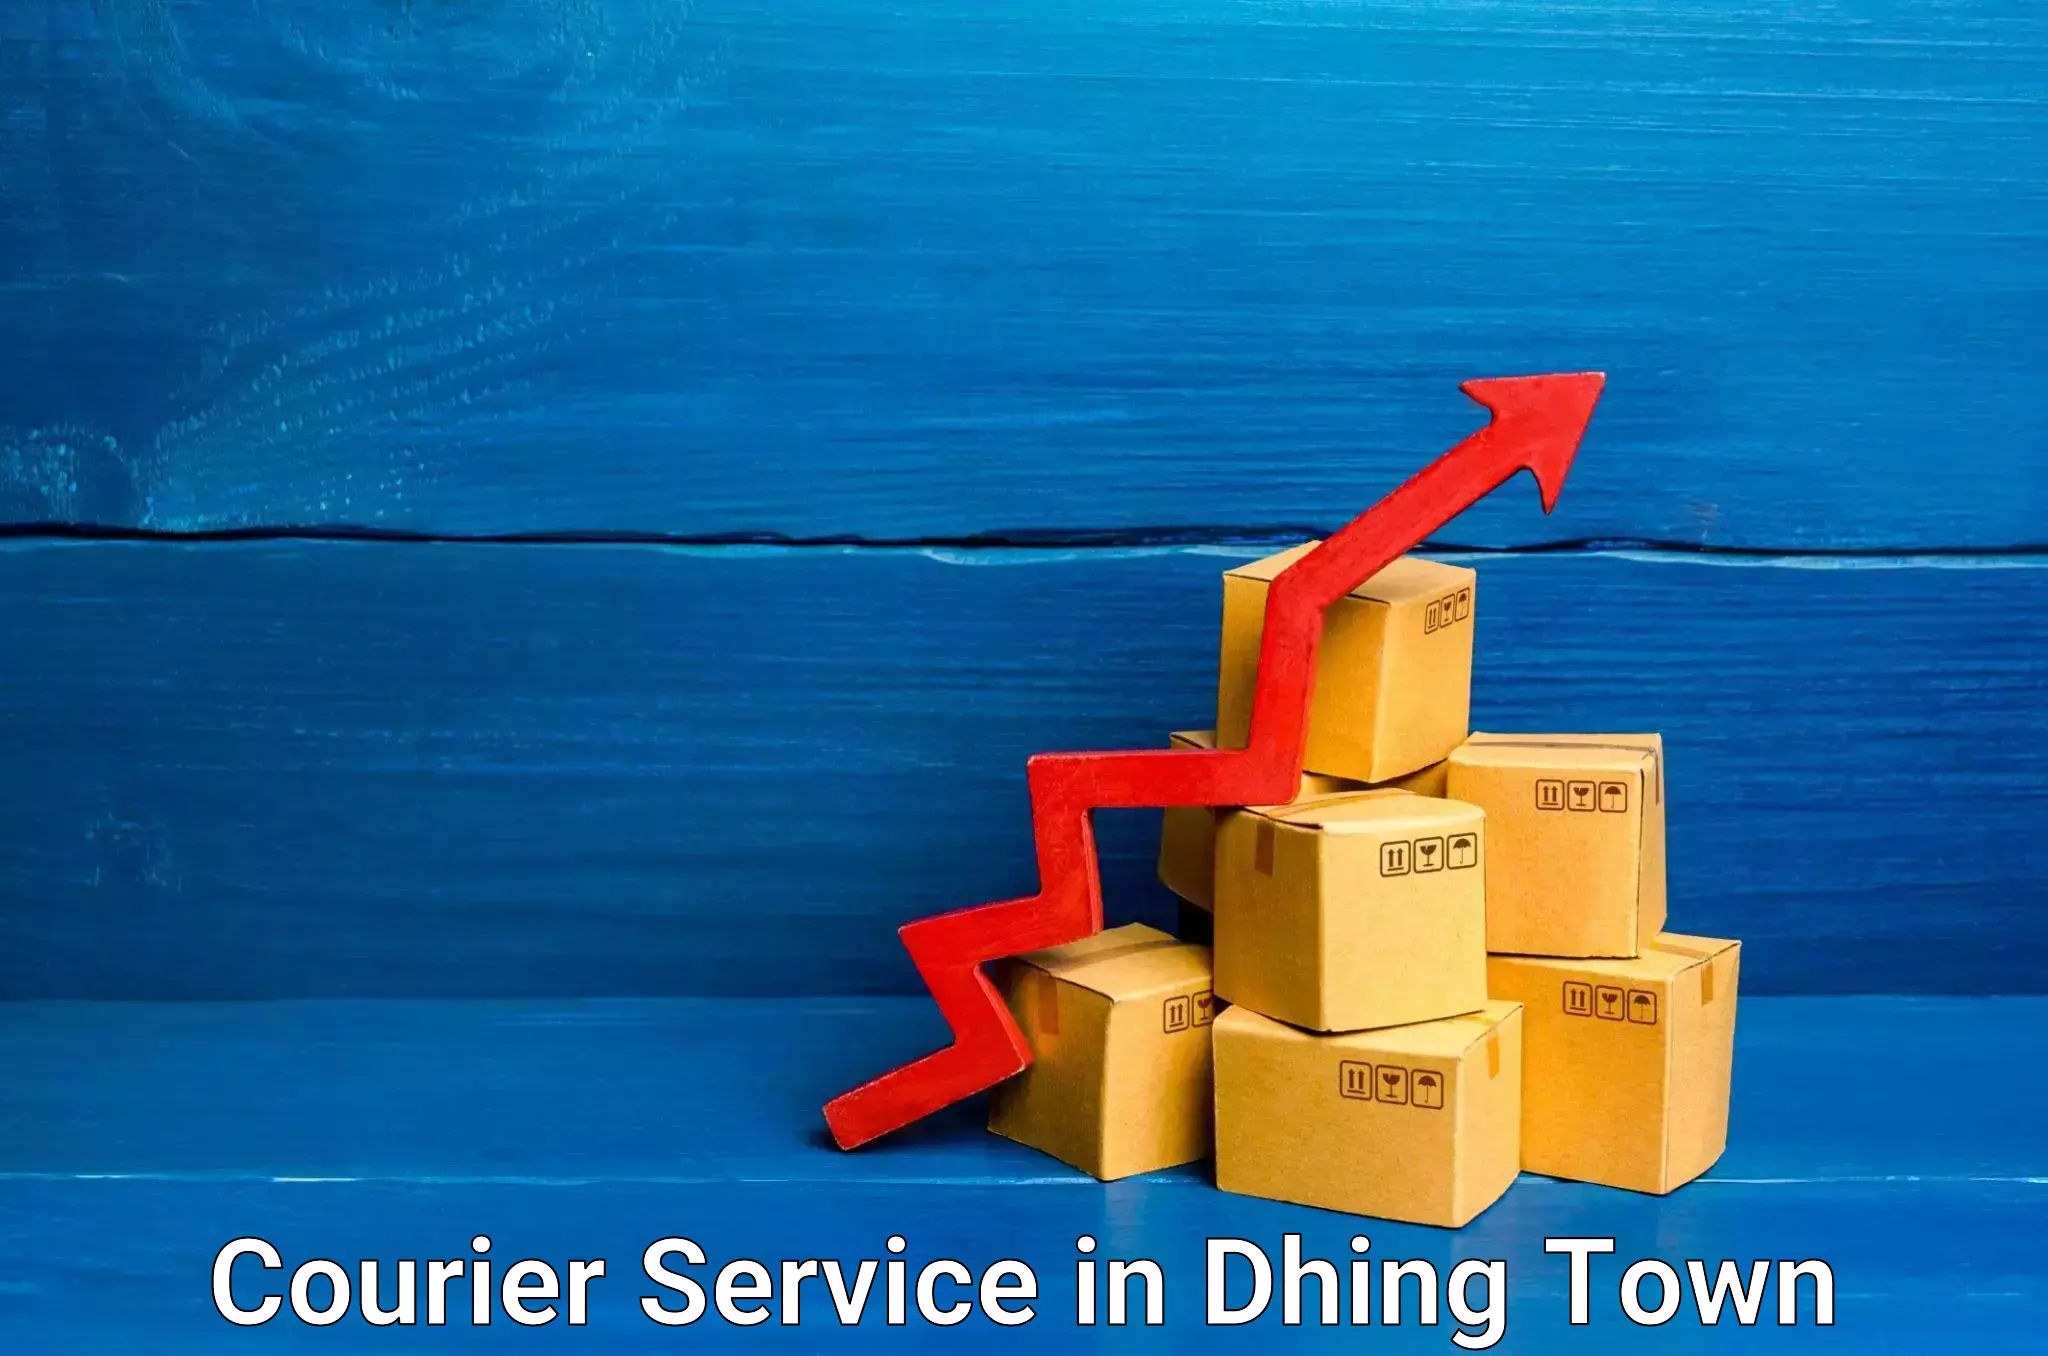 Efficient freight service in Dhing Town